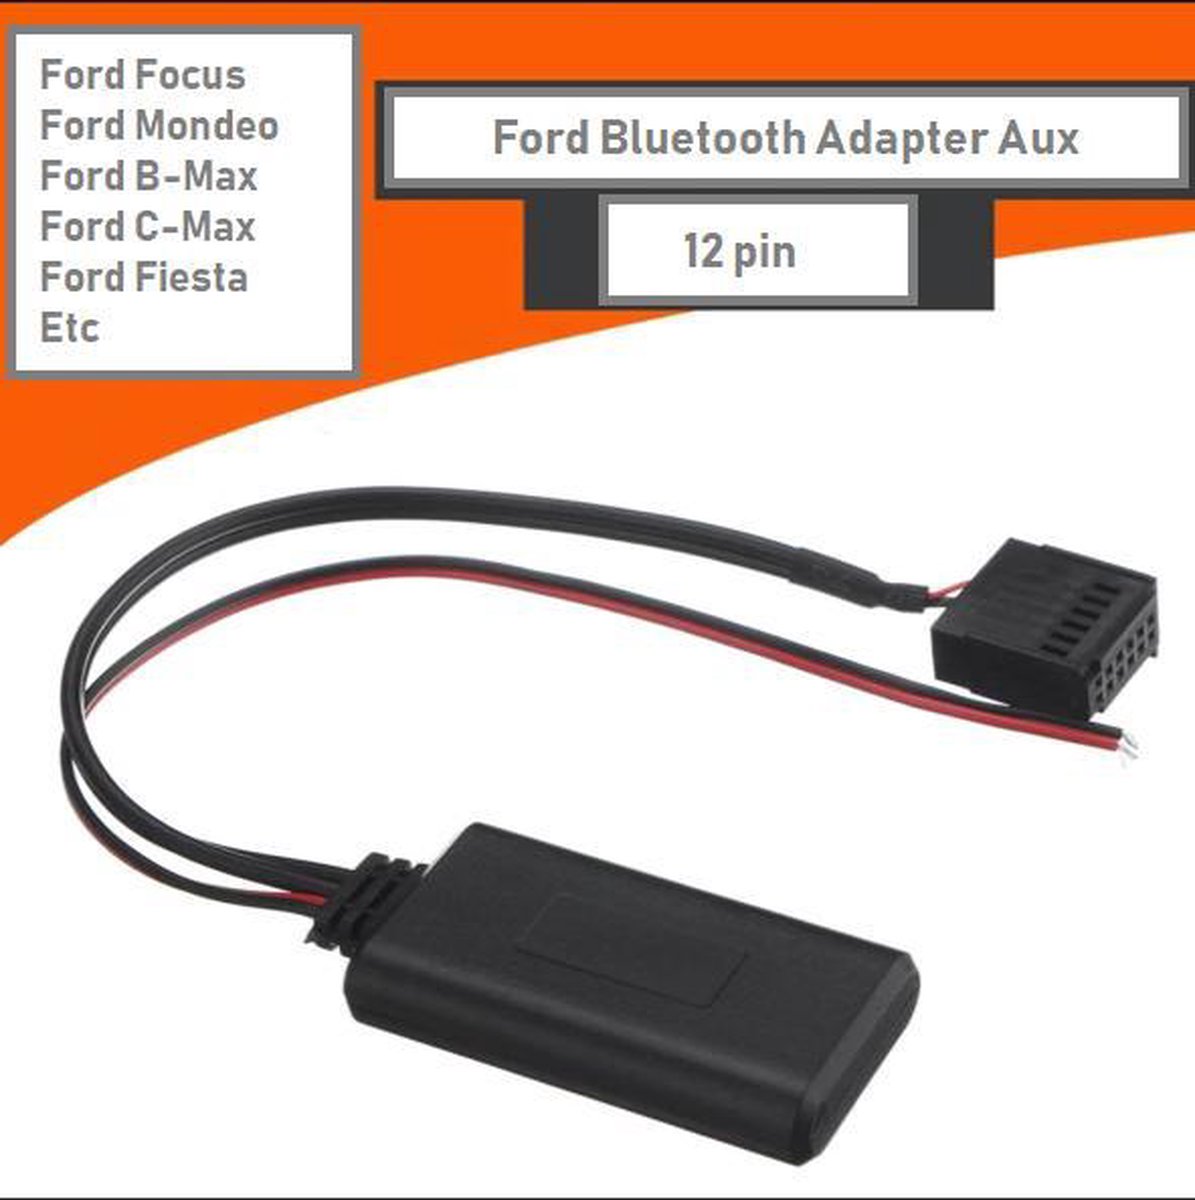 Ford Focus Bluetooth Audio Streaming Adapter Aux Module Wagon Cd 6000 Cd6000 Cd6006 Focus Rs Gt